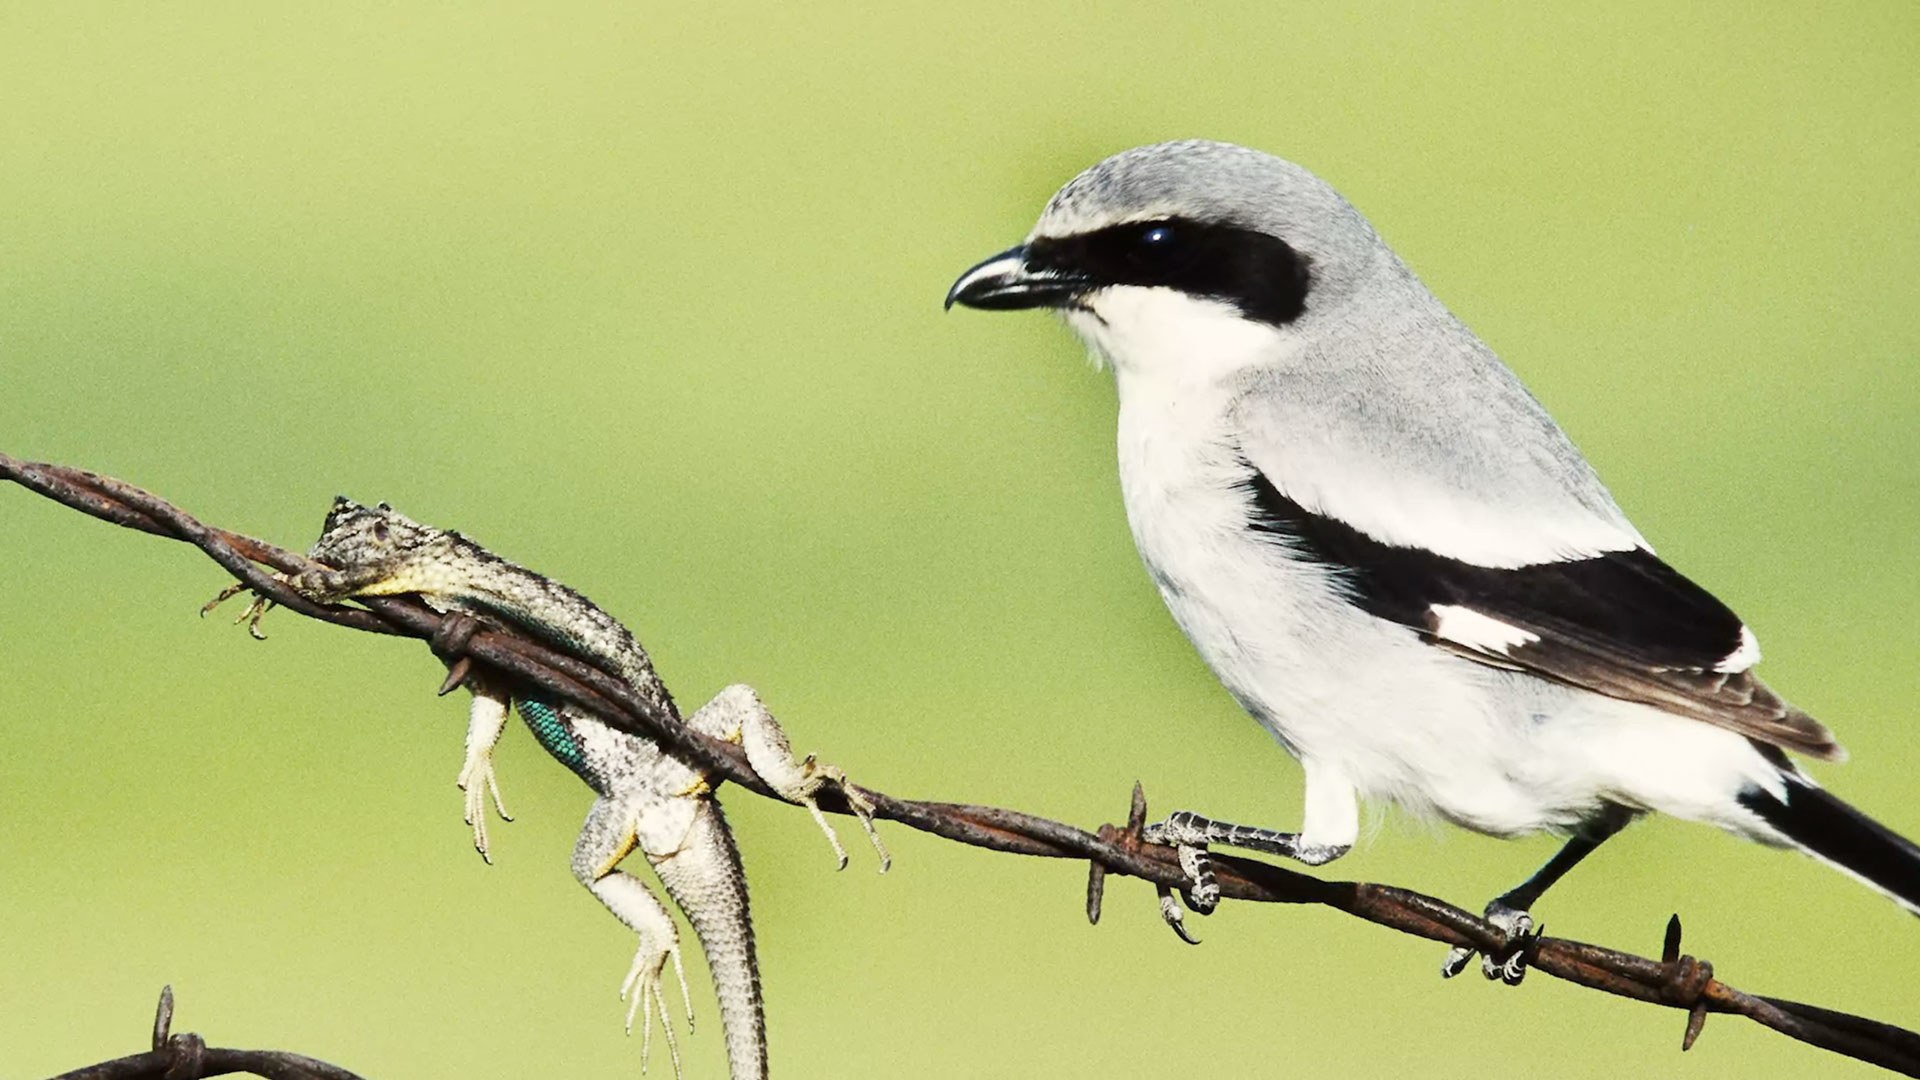 Absurd Creatures: This Bird Impales Its Victims on Thorns. How Metal ...